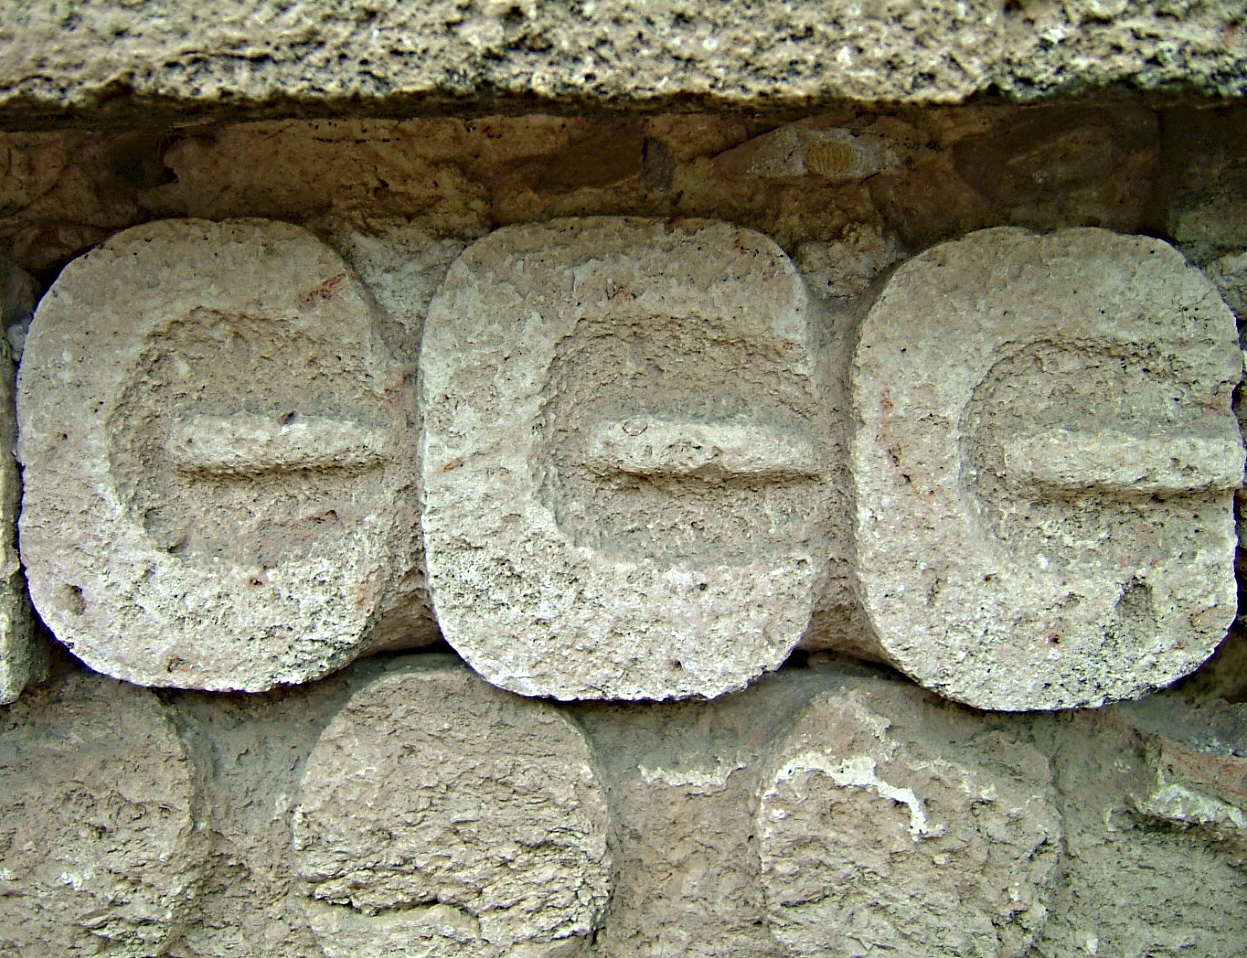  - Corn seeds carved in stone, Uxmal